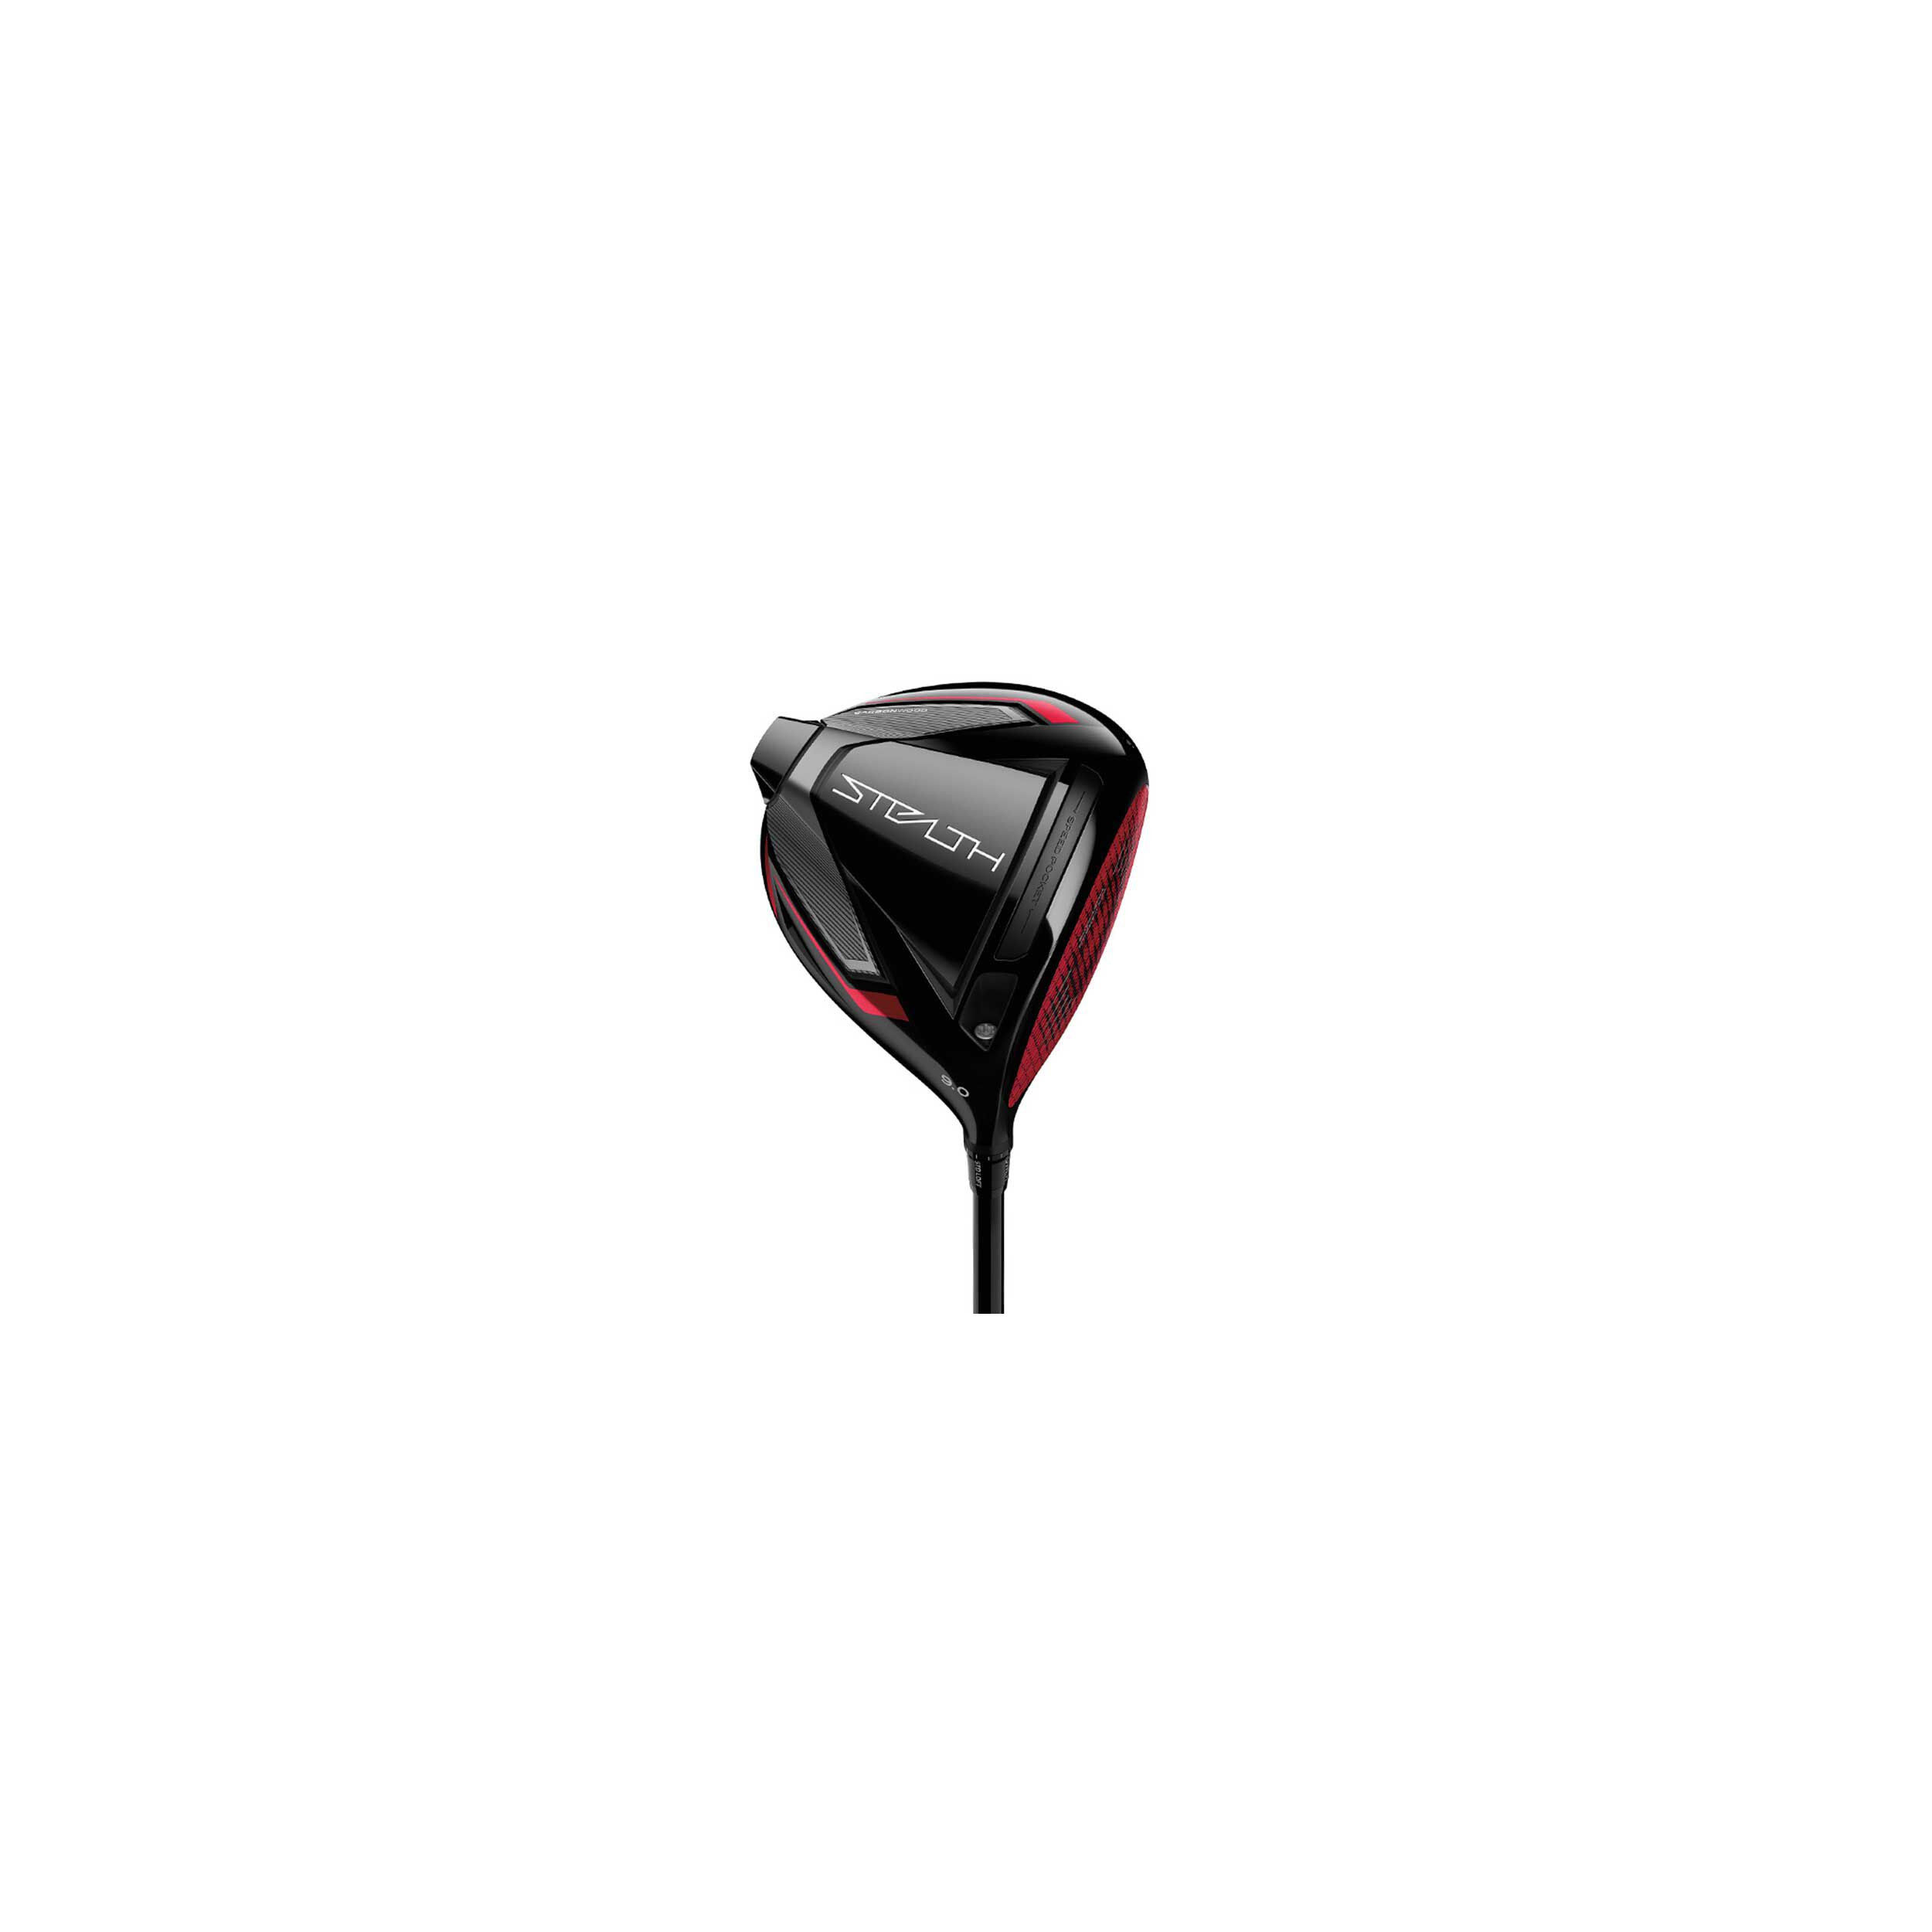 DRIVER TAYLORMADE STEALTH 10.5 RIGHT